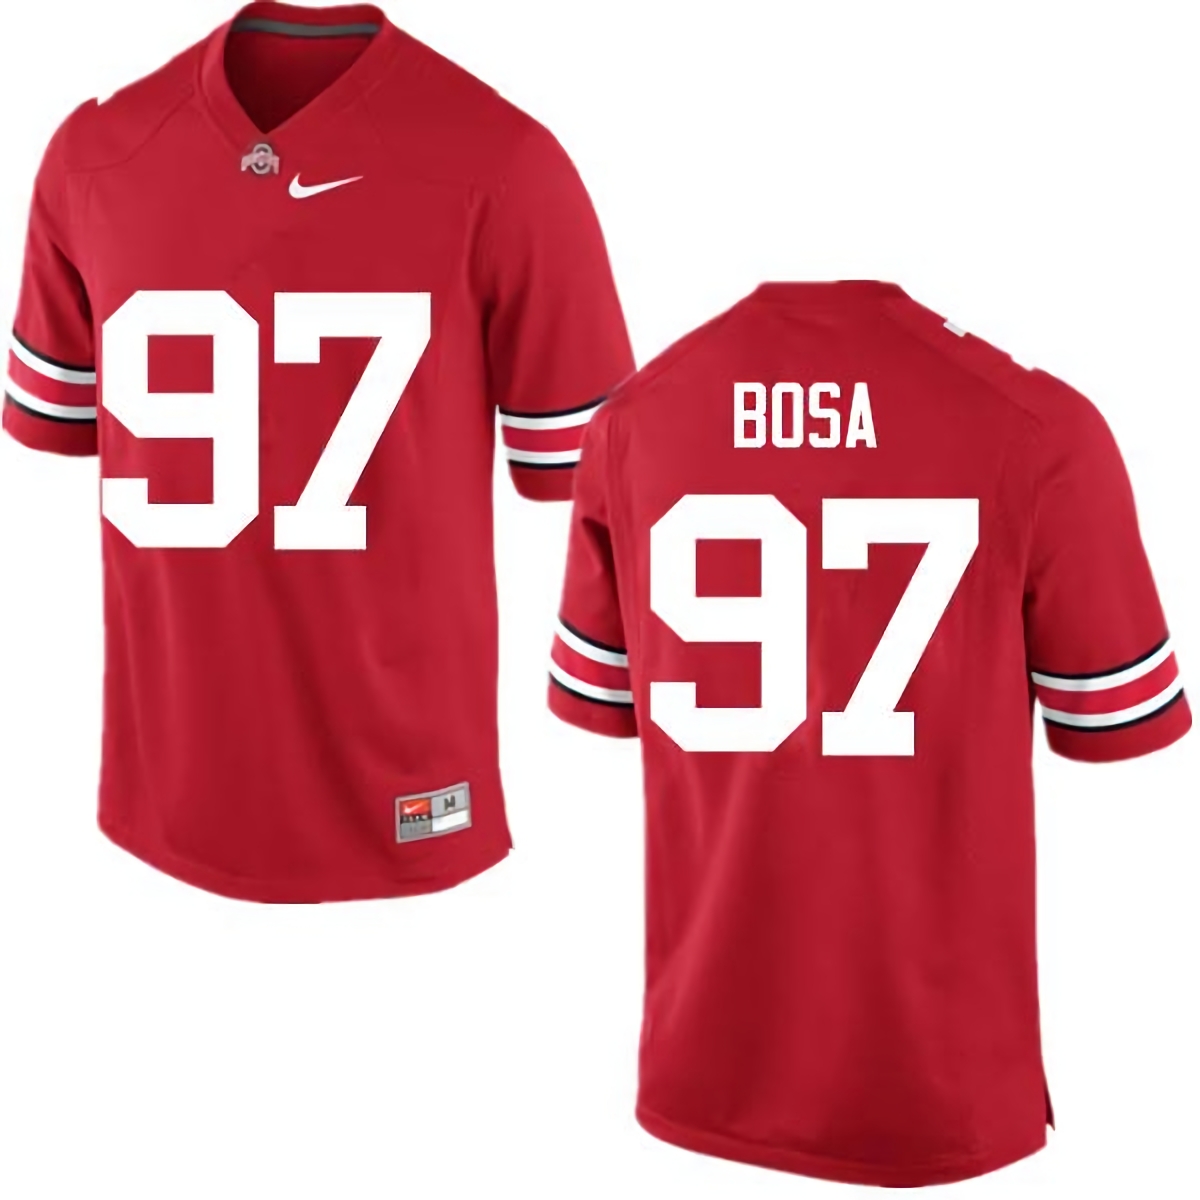 Joey Bosa Ohio State Buckeyes Men's NCAA #97 Nike Red College Stitched Football Jersey IVF8556ZG